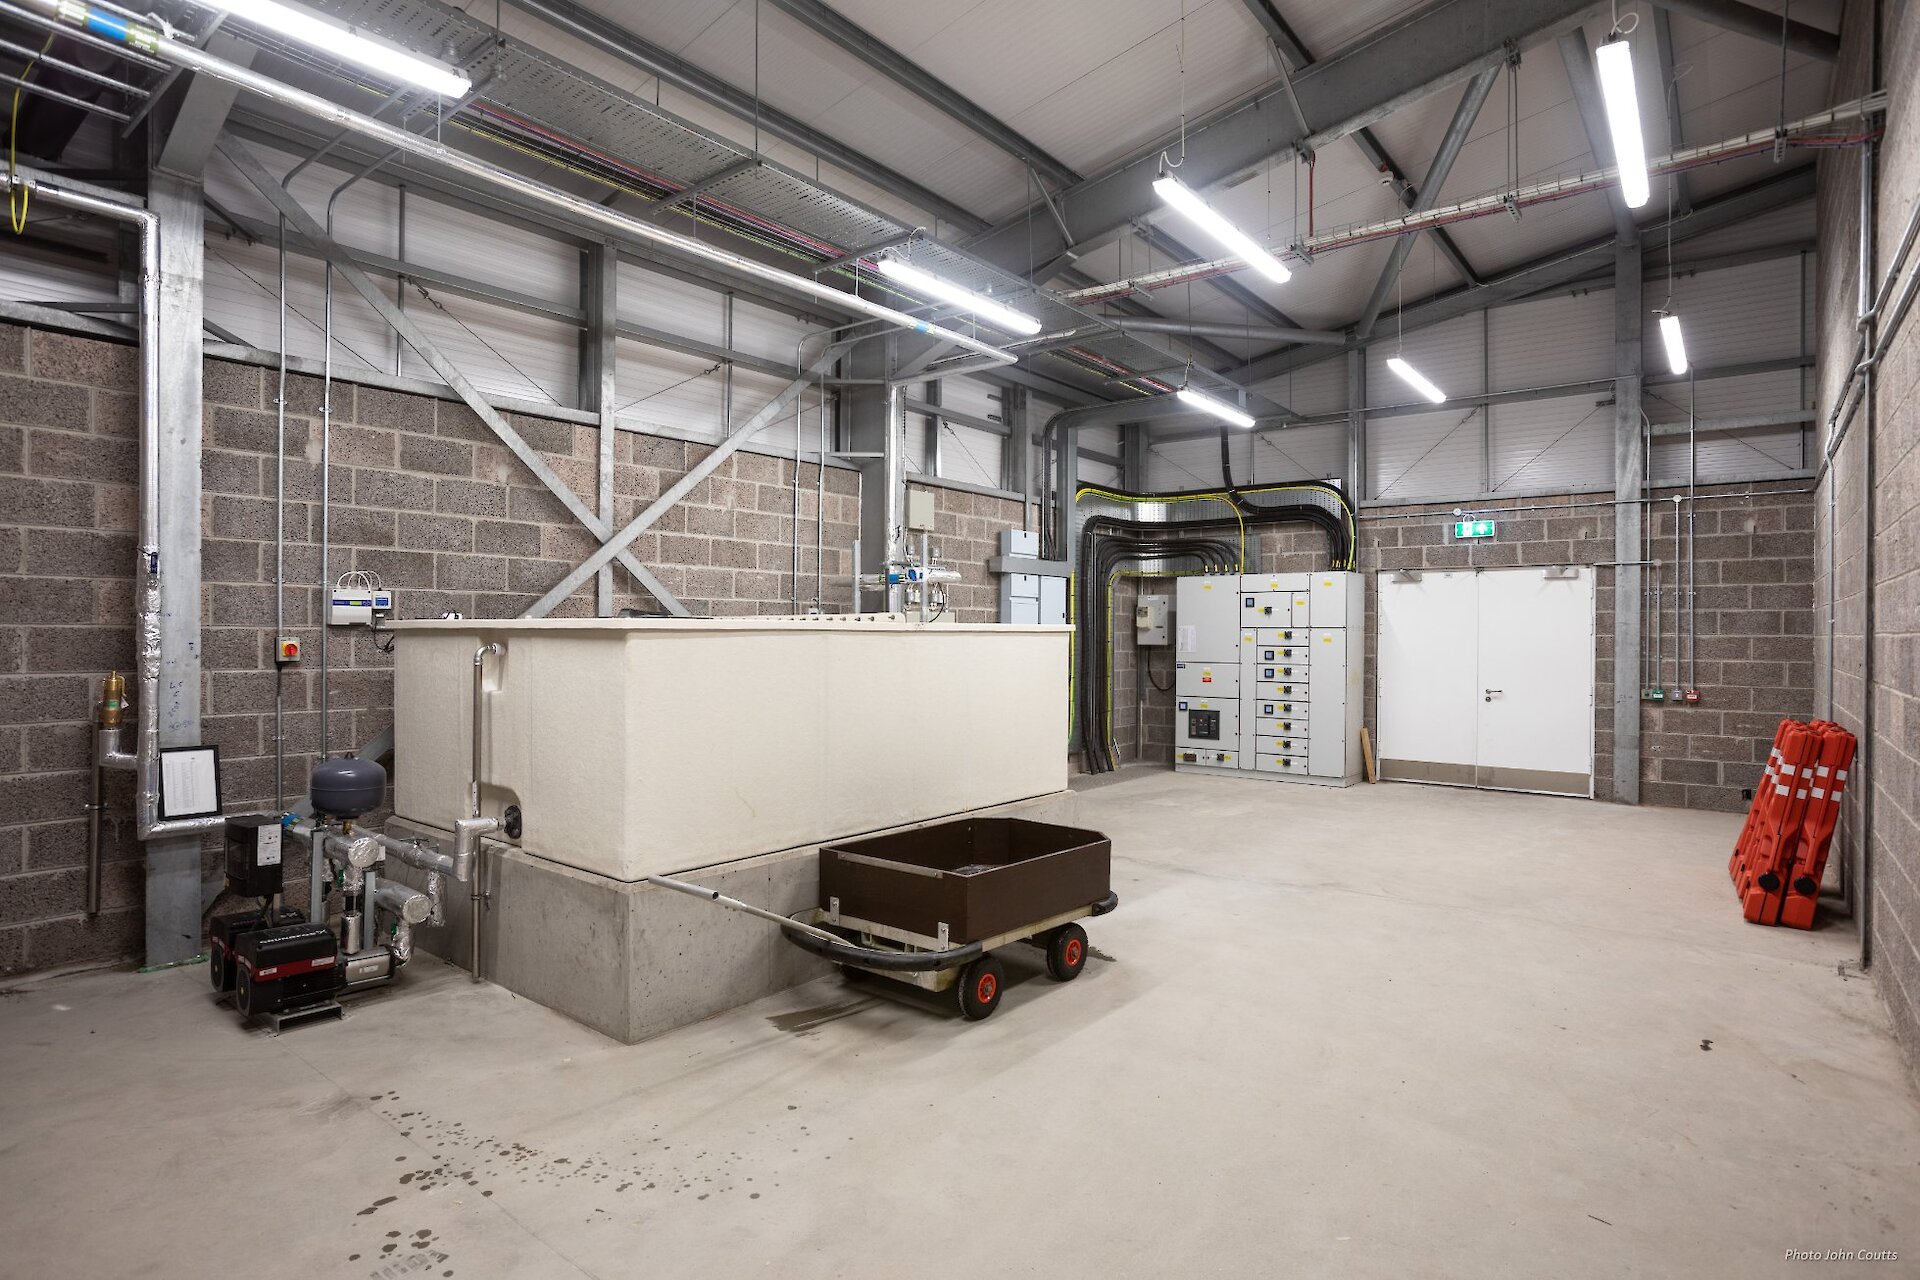 Plant room with controls for refrigeration and power